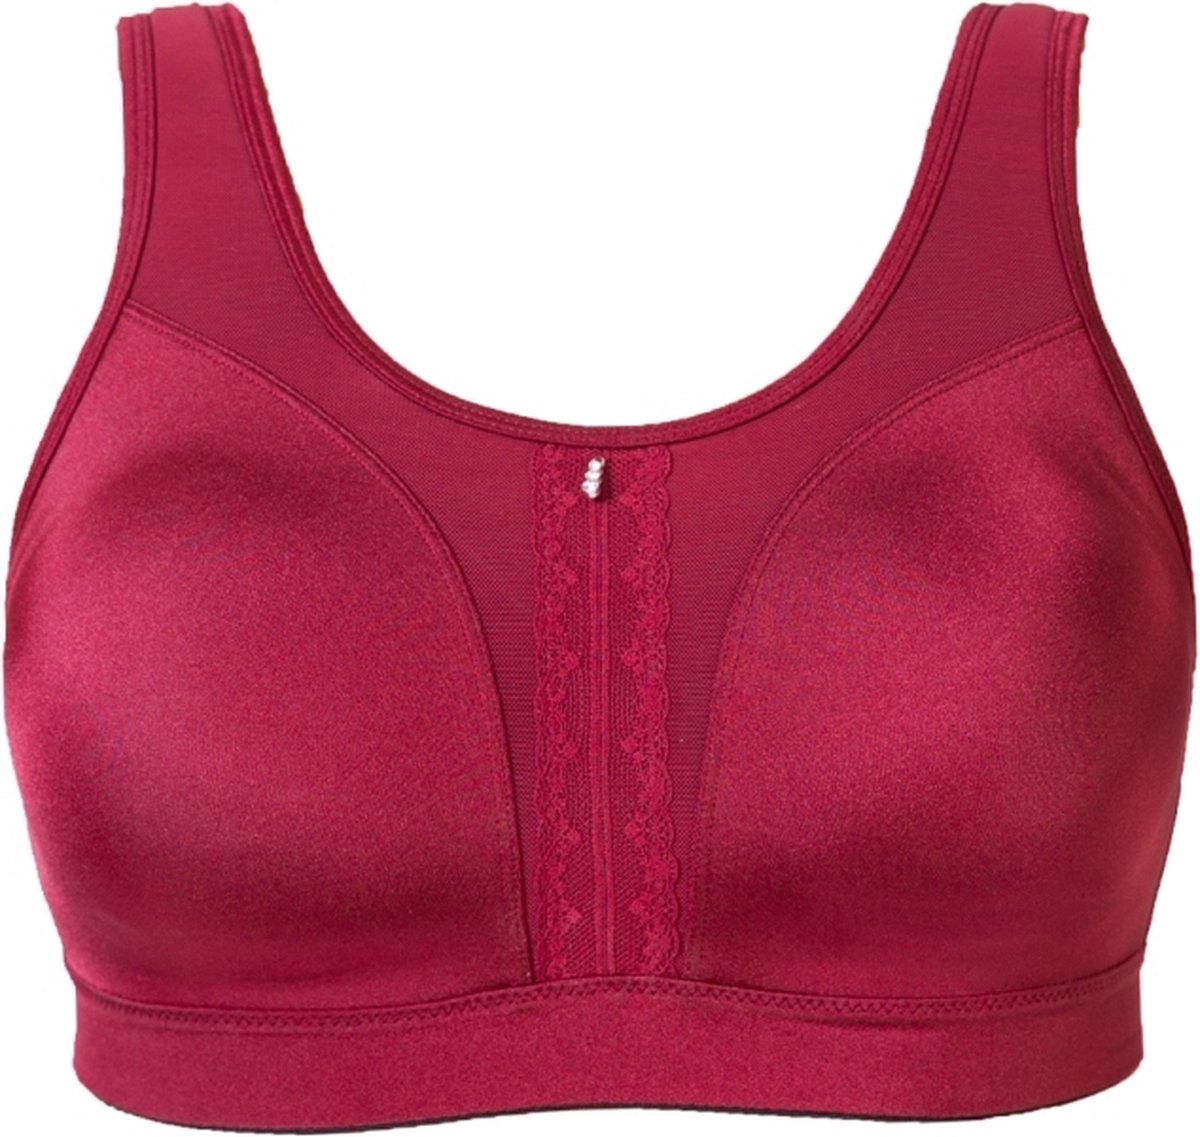 High impact Sport BH (zonder beugel) Cannes, Deep Red / Bordeaux rood, maat: 85E